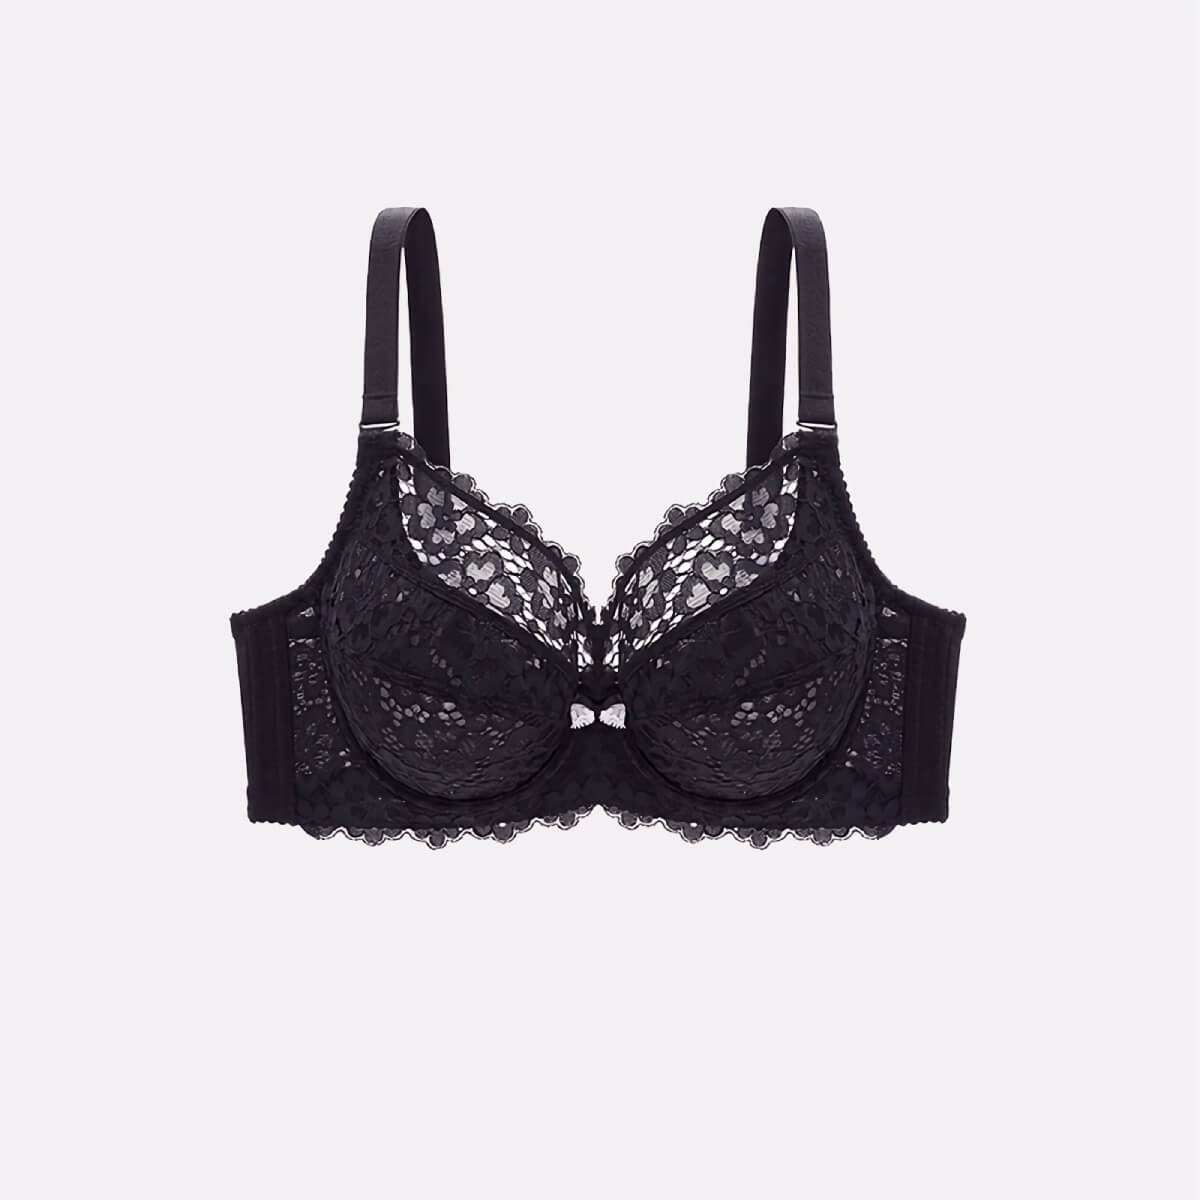 Full Coverage Unlined Lace Bra